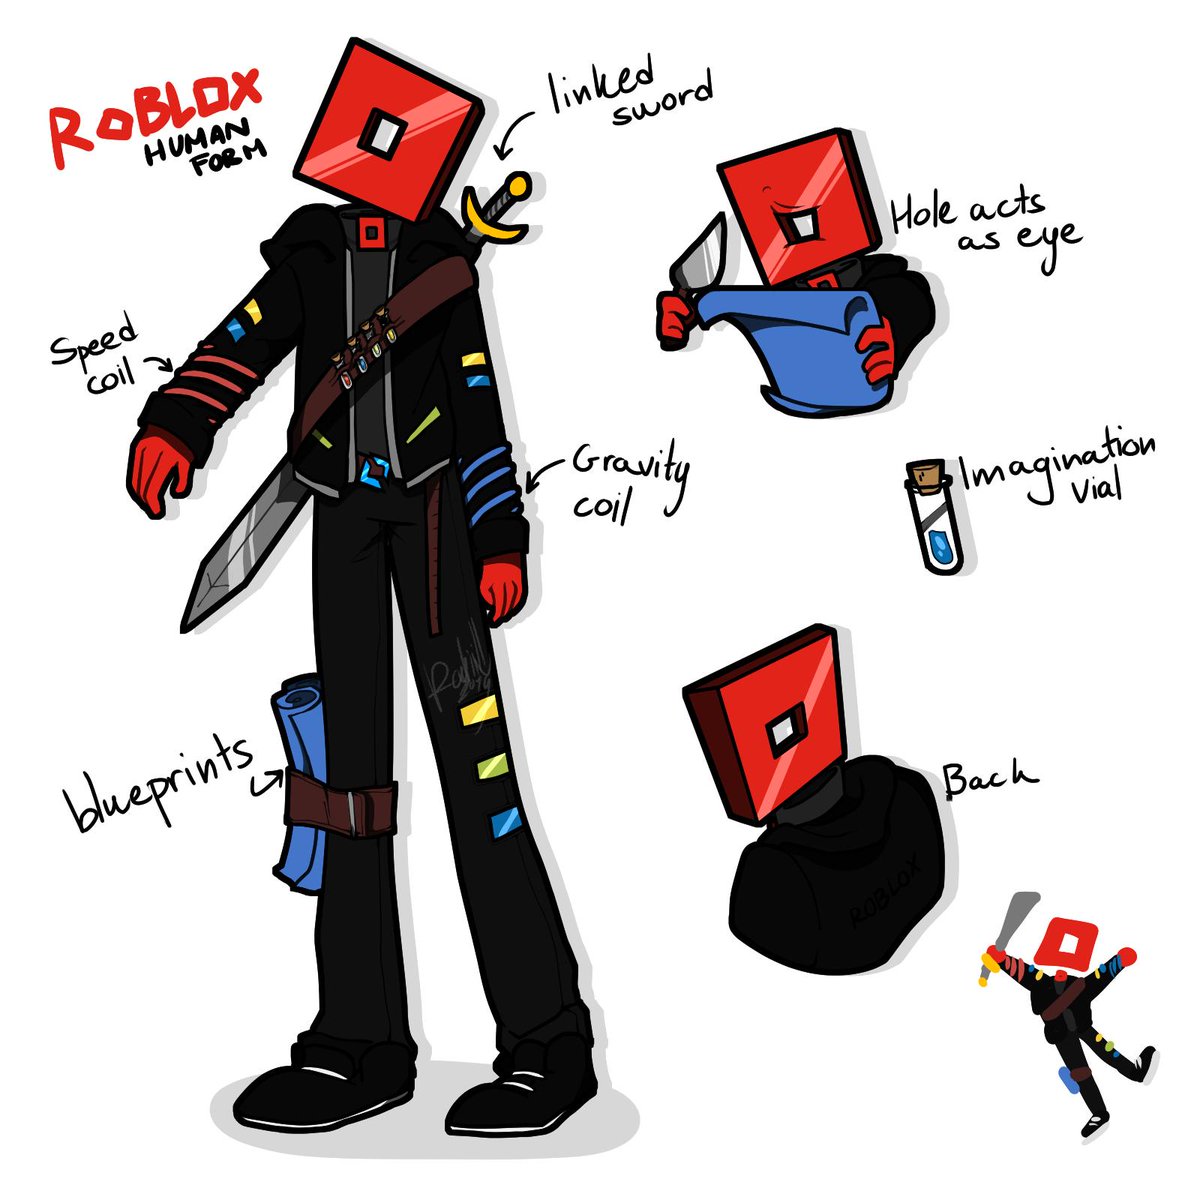 Roblox On Twitter Design An Rthro Avatar Submit Your Concept See Your Art Come To Life The Robloxrthrocontest Is Back Design Your Original Rthro Character To Be Included In - roblox arthro drawings